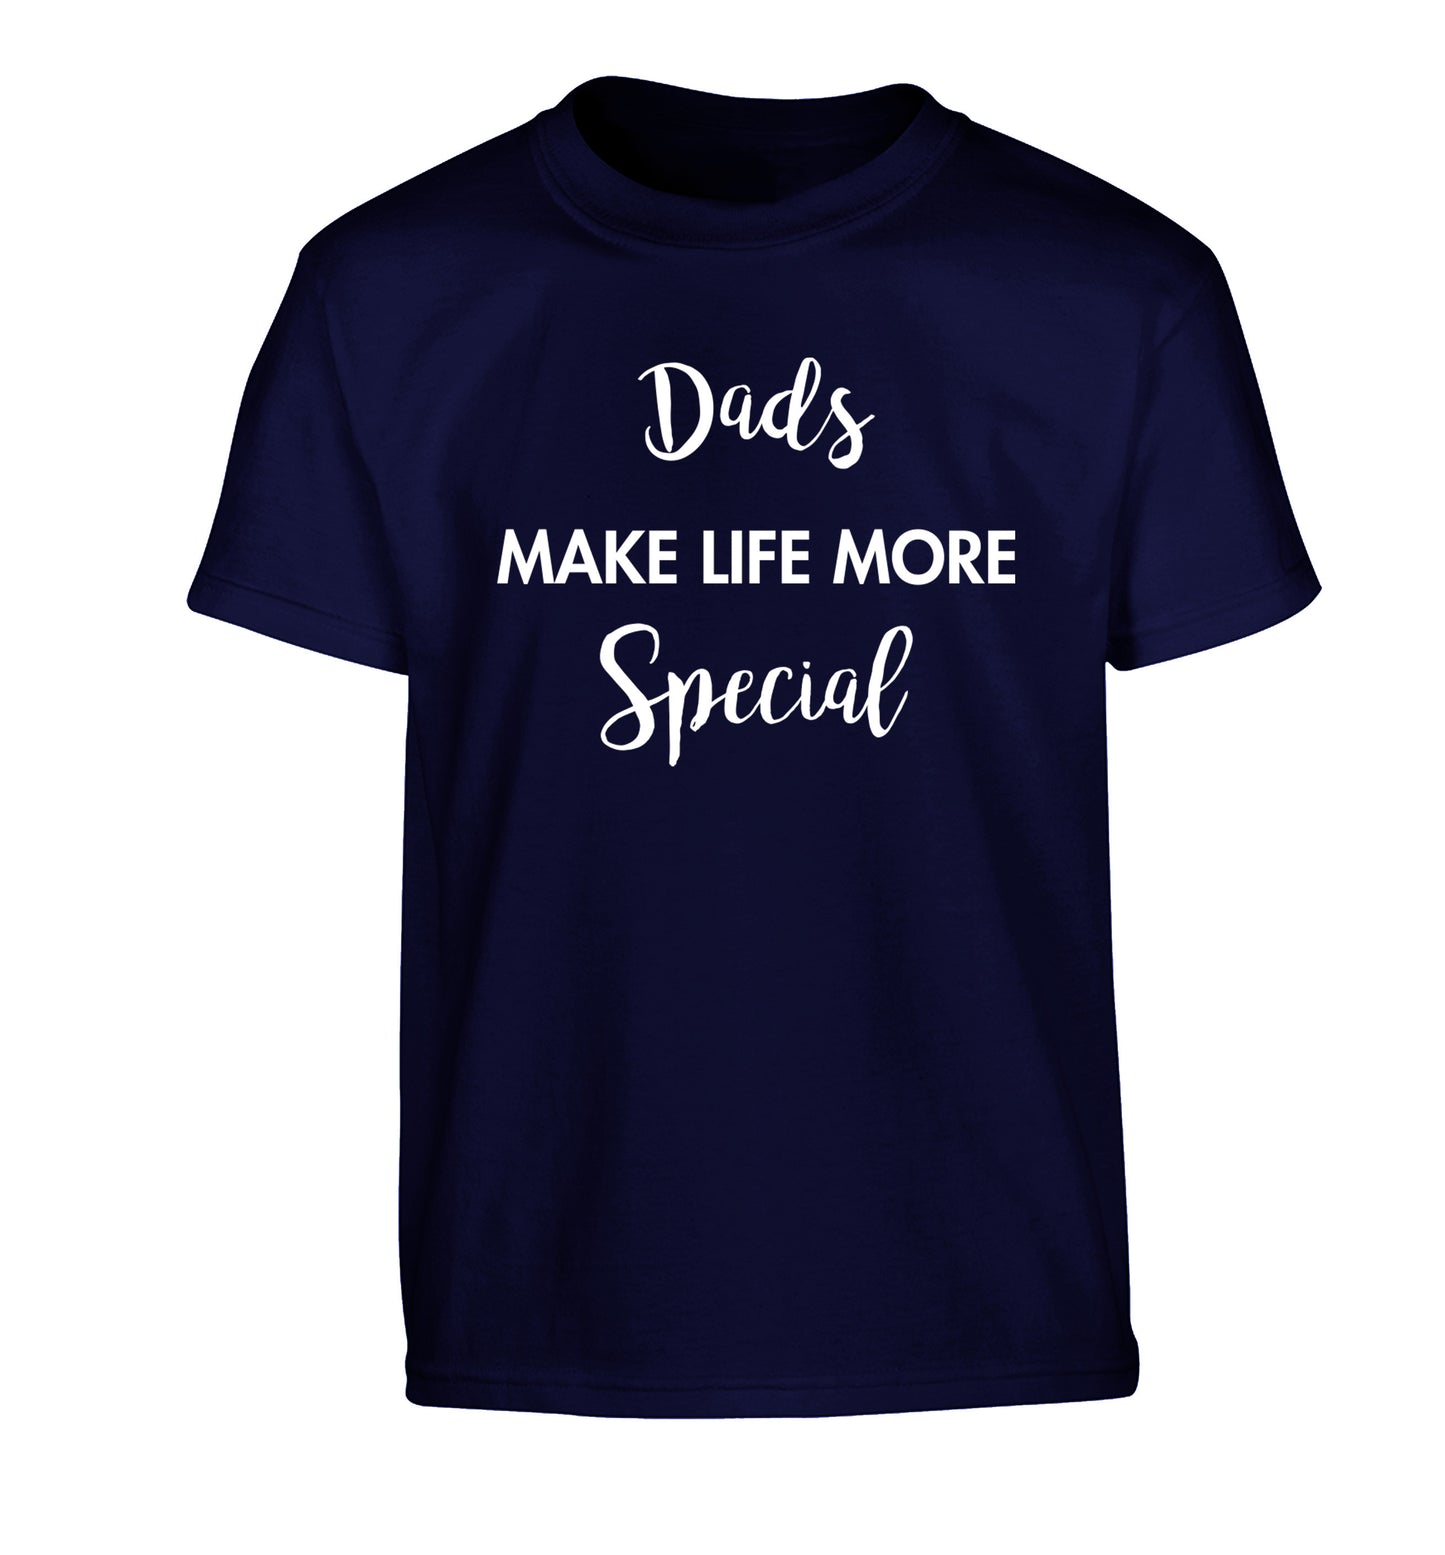 Dads make life more special Children's navy Tshirt 12-14 Years